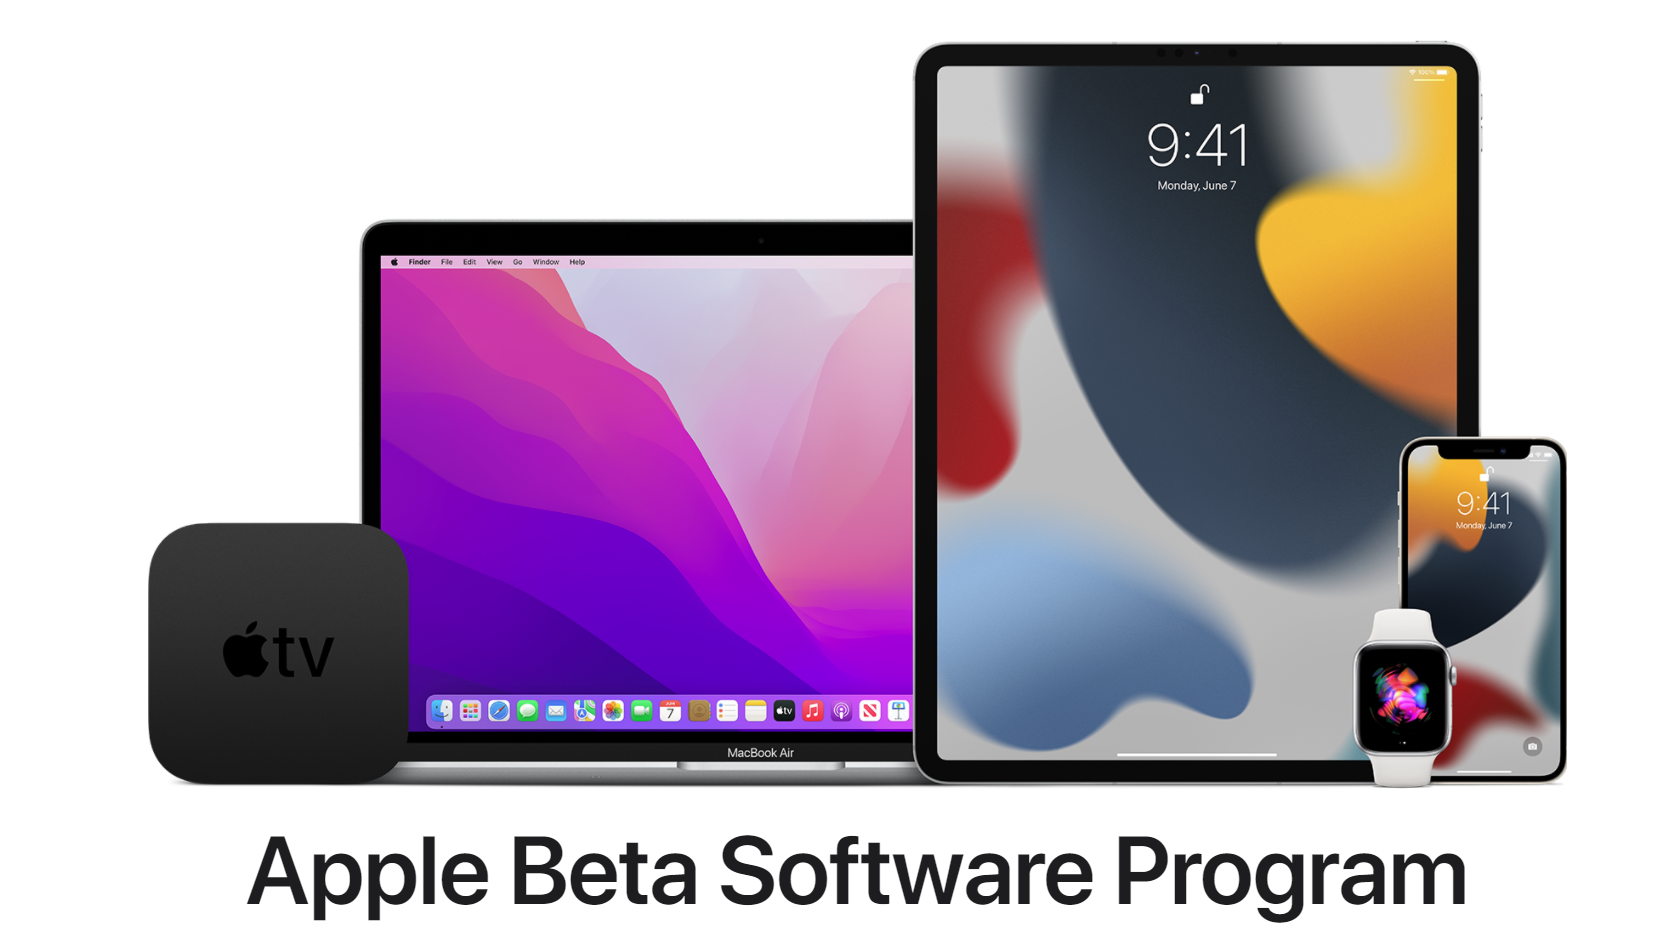 How to download and install the iOS 15 public beta